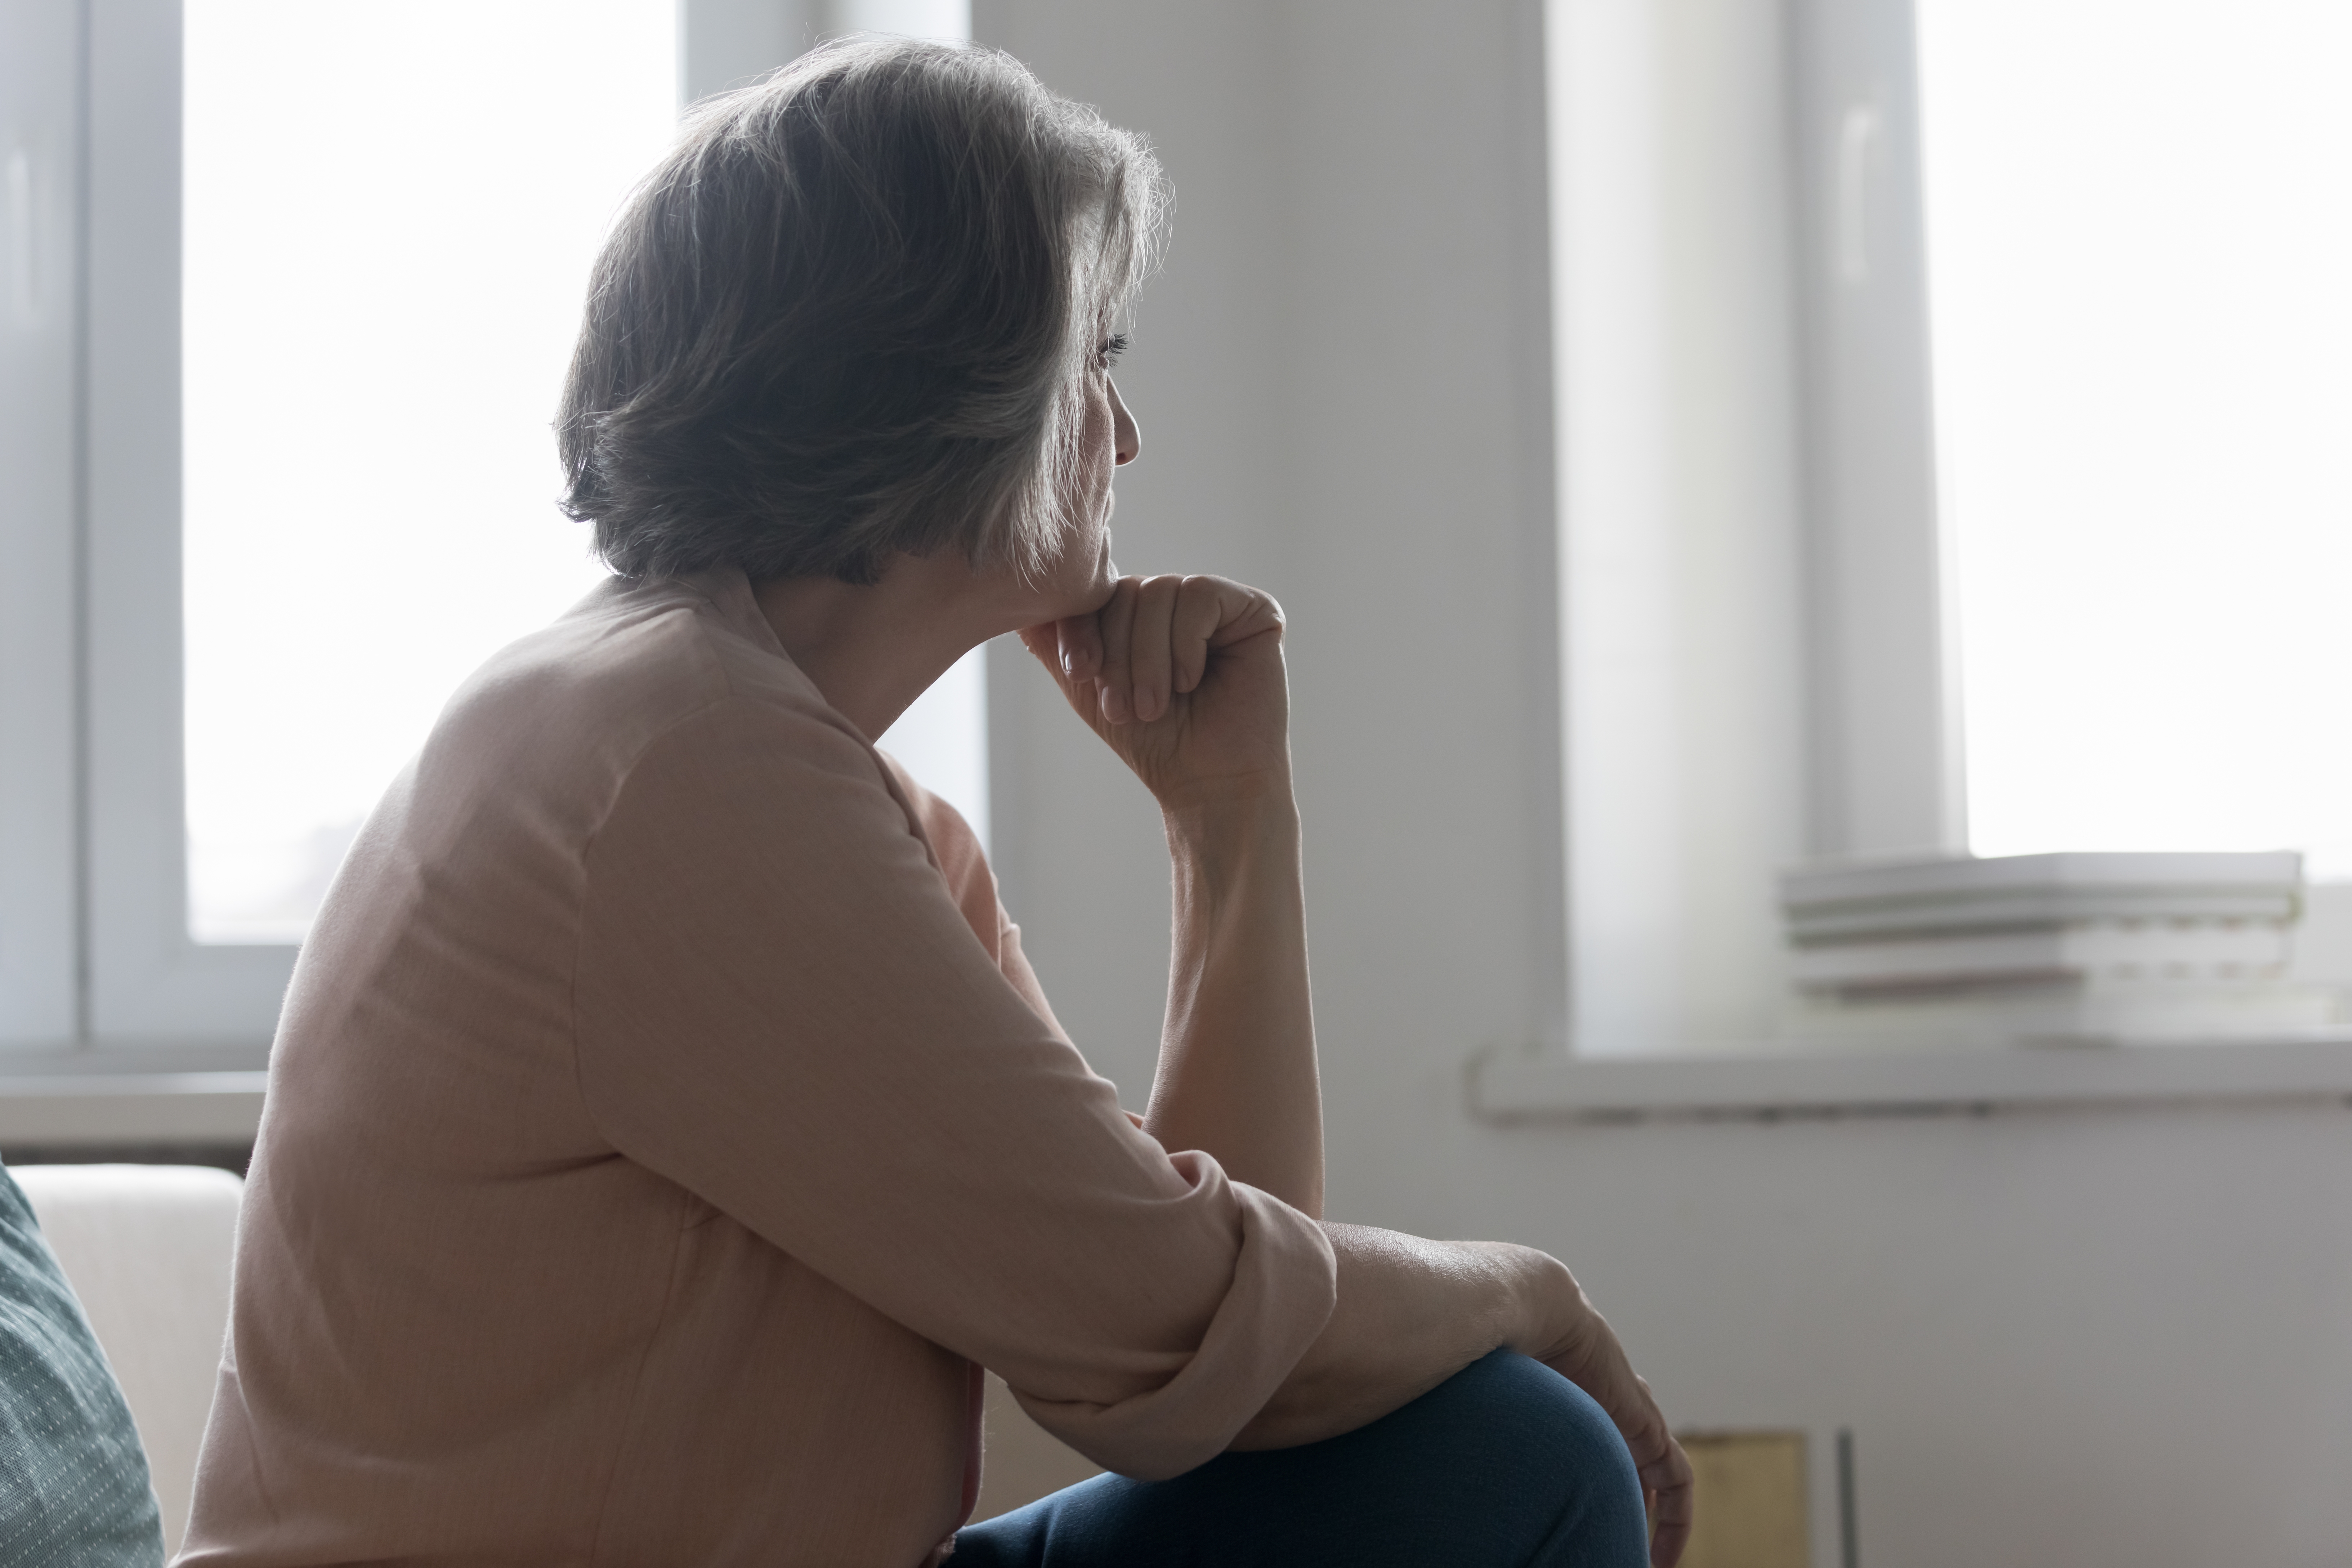 An older woman sitting on a couch and looking outside thoughtfully | Source: Shutterstock